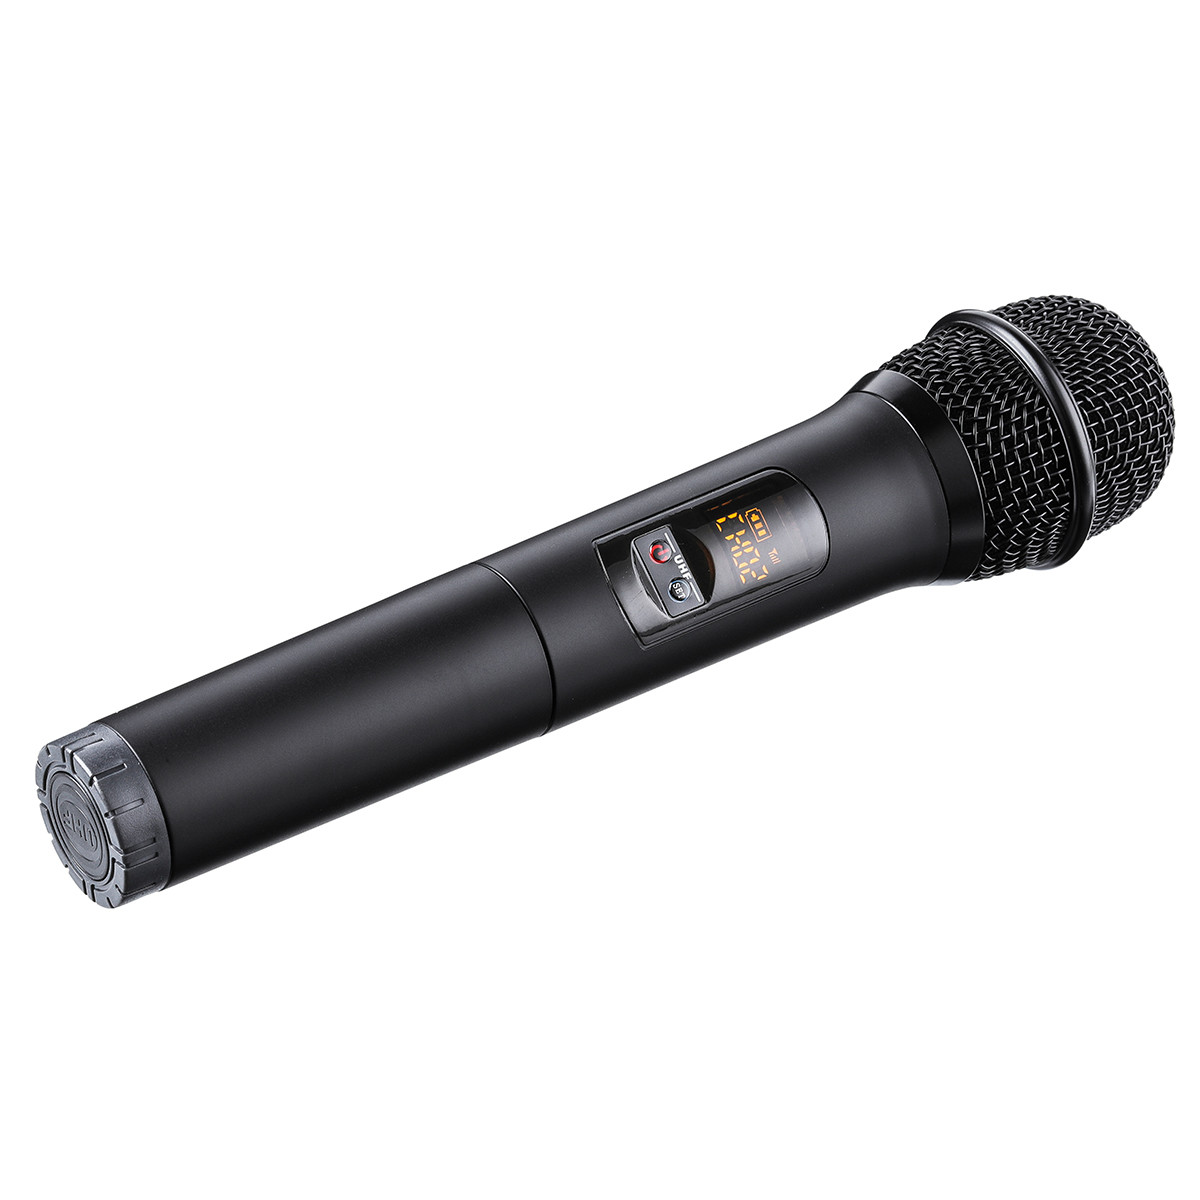 Find ELEGIANT Wireless UHF Handheld Microphone for Home Karaoke Singing for Sale on Gipsybee.com with cryptocurrencies